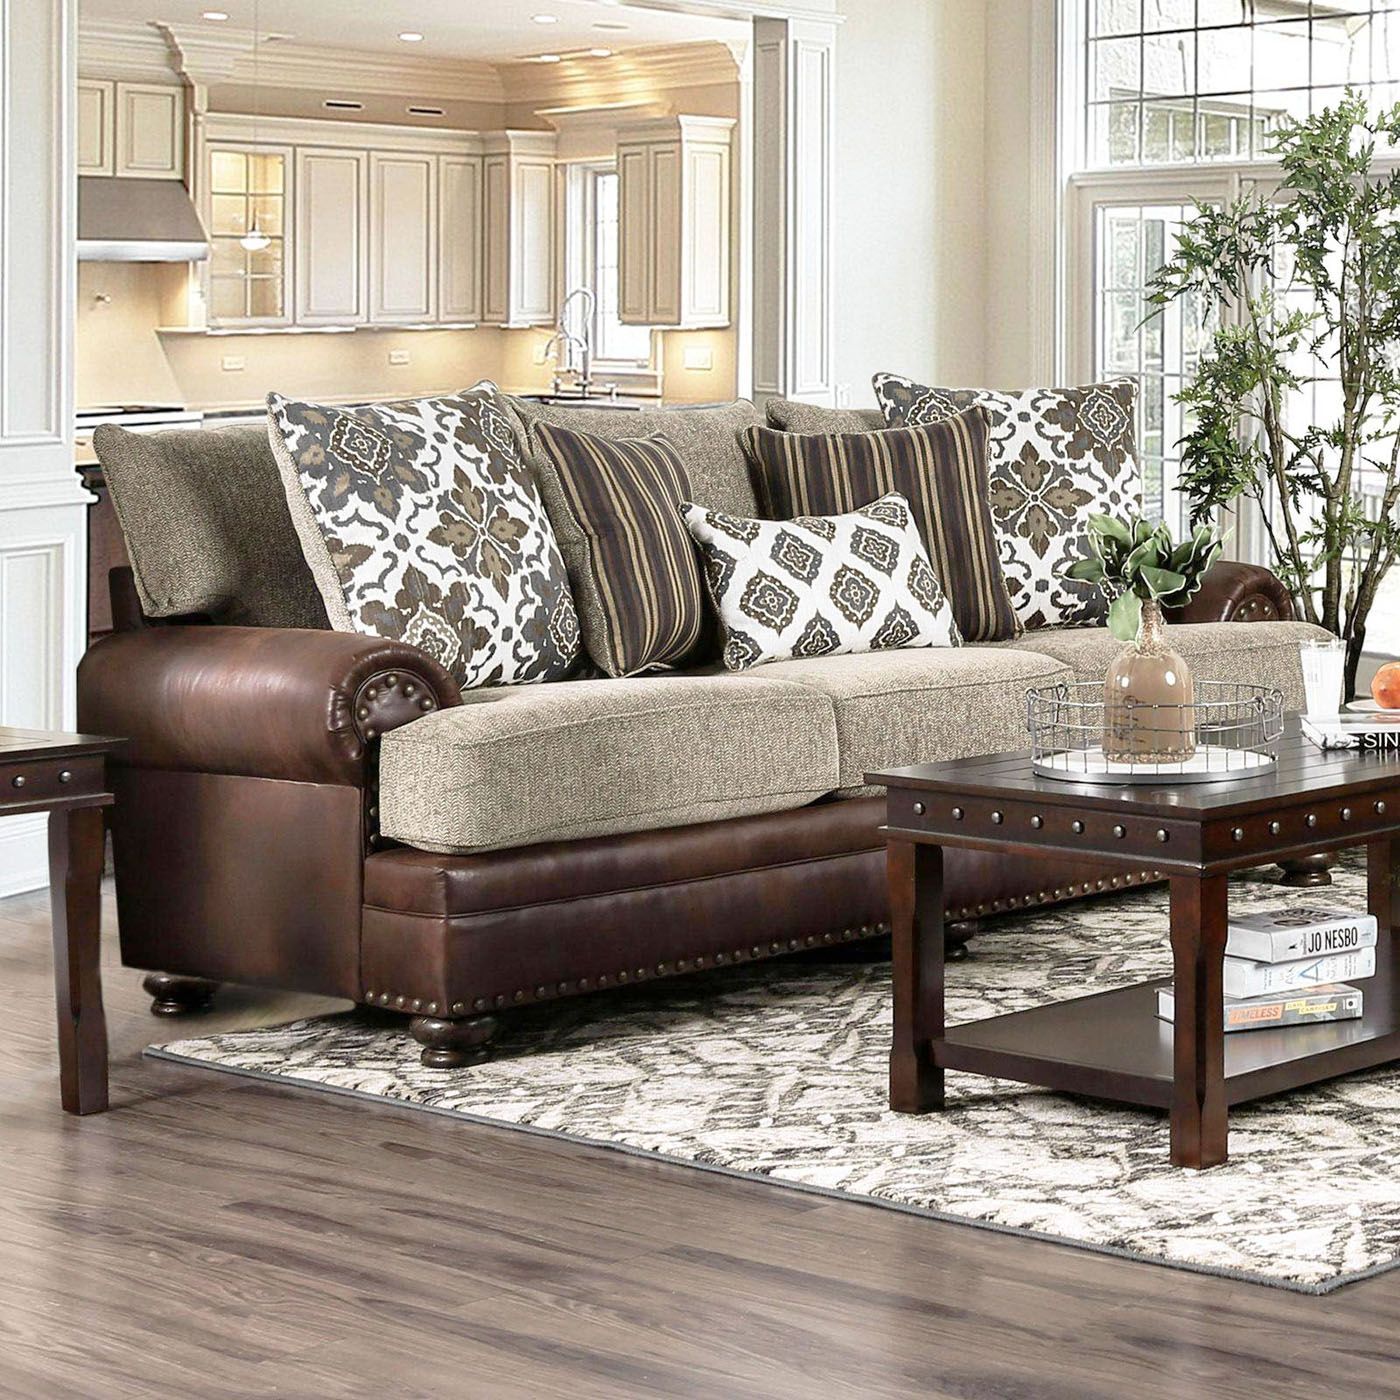 Transitional Two Tone Beige & Brown Sofa Set W/ Rolled Arms & Nailhead Trim Throughout Ecru And Otter Console Tables (View 20 of 20)